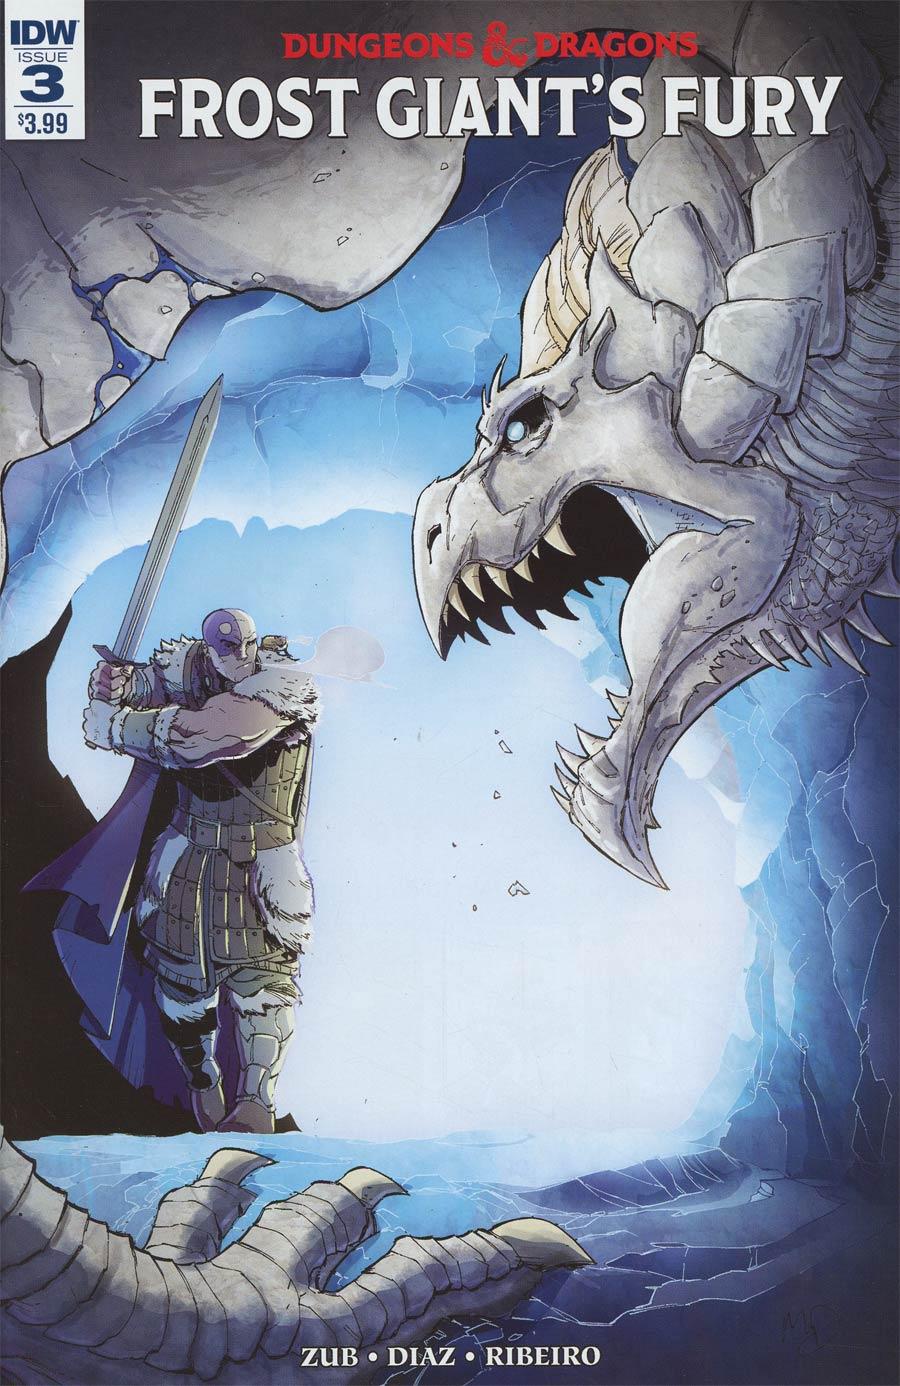 Dungeons & Dragons Frost Giants Fury Vol. 1 #3